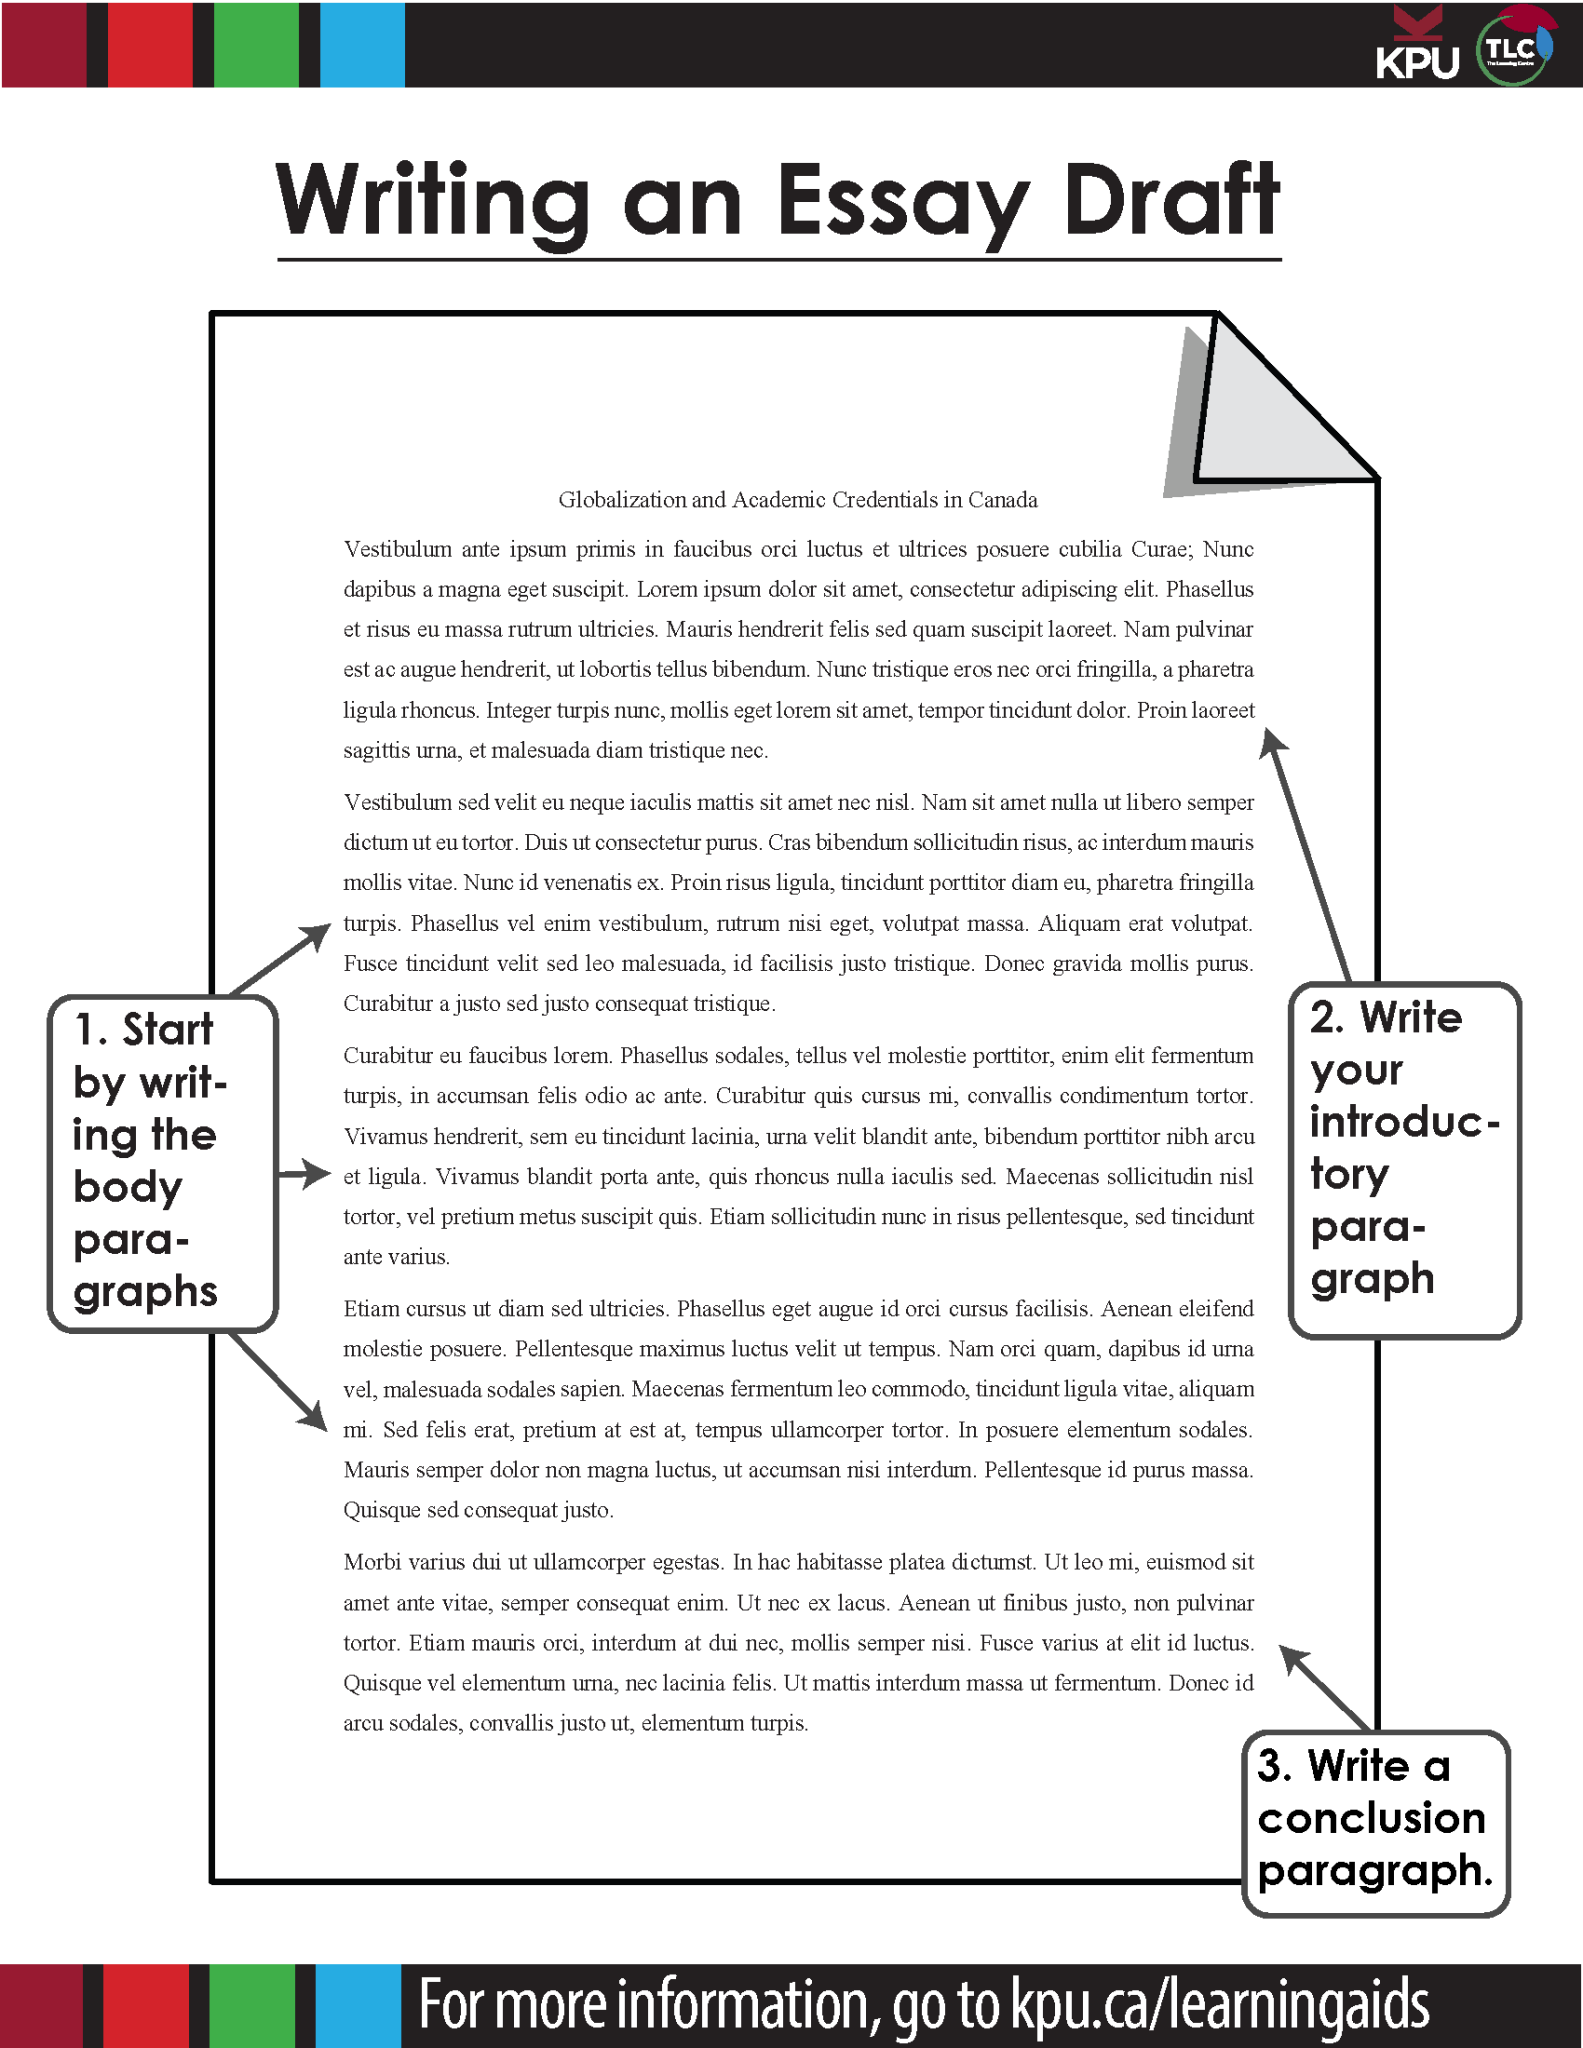 How to start writing. Essay Draft. Essay writing. The essays. How to write an essay.